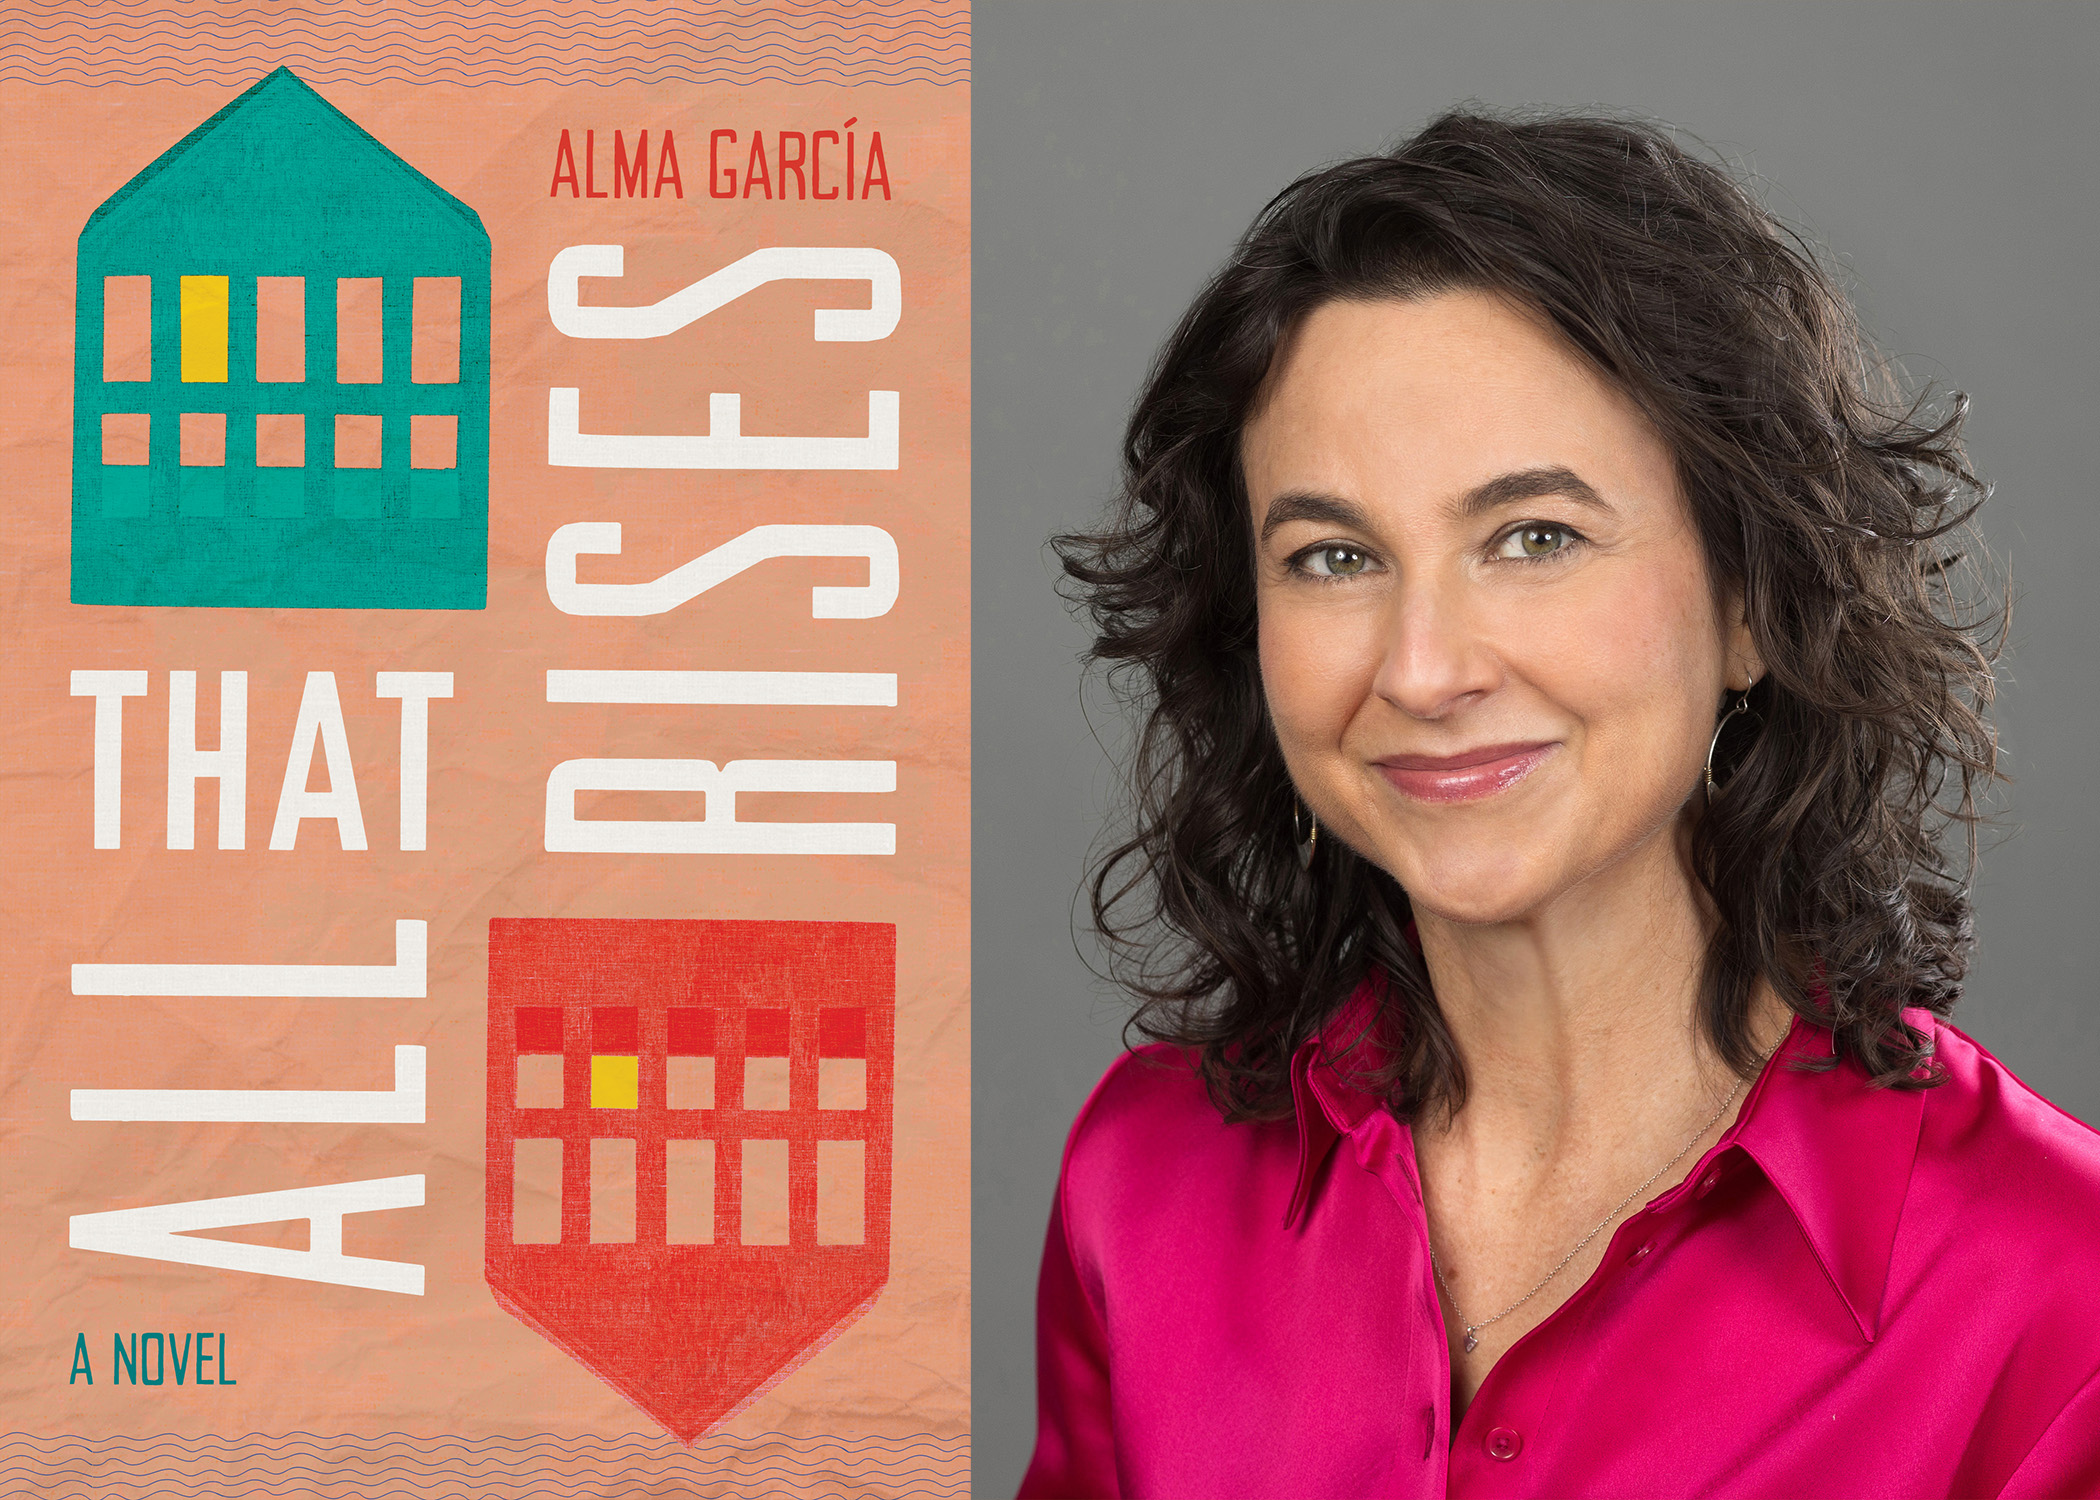 All That Rises Cover and Alma Garcia